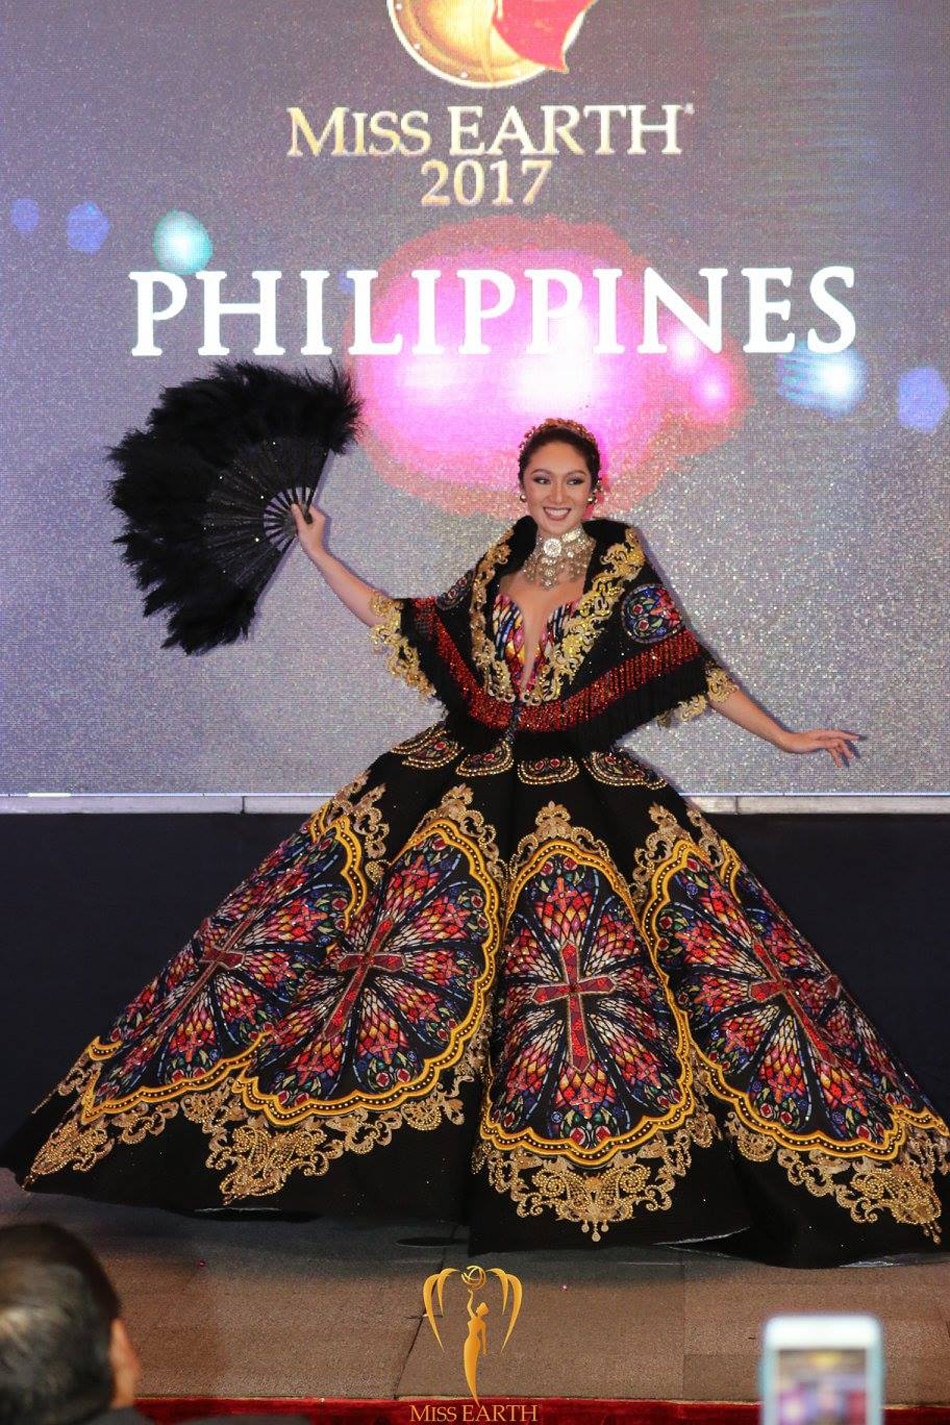 IN PHOTOS: Miss Earth 2017 candidates in national costume | ABS-CBN News